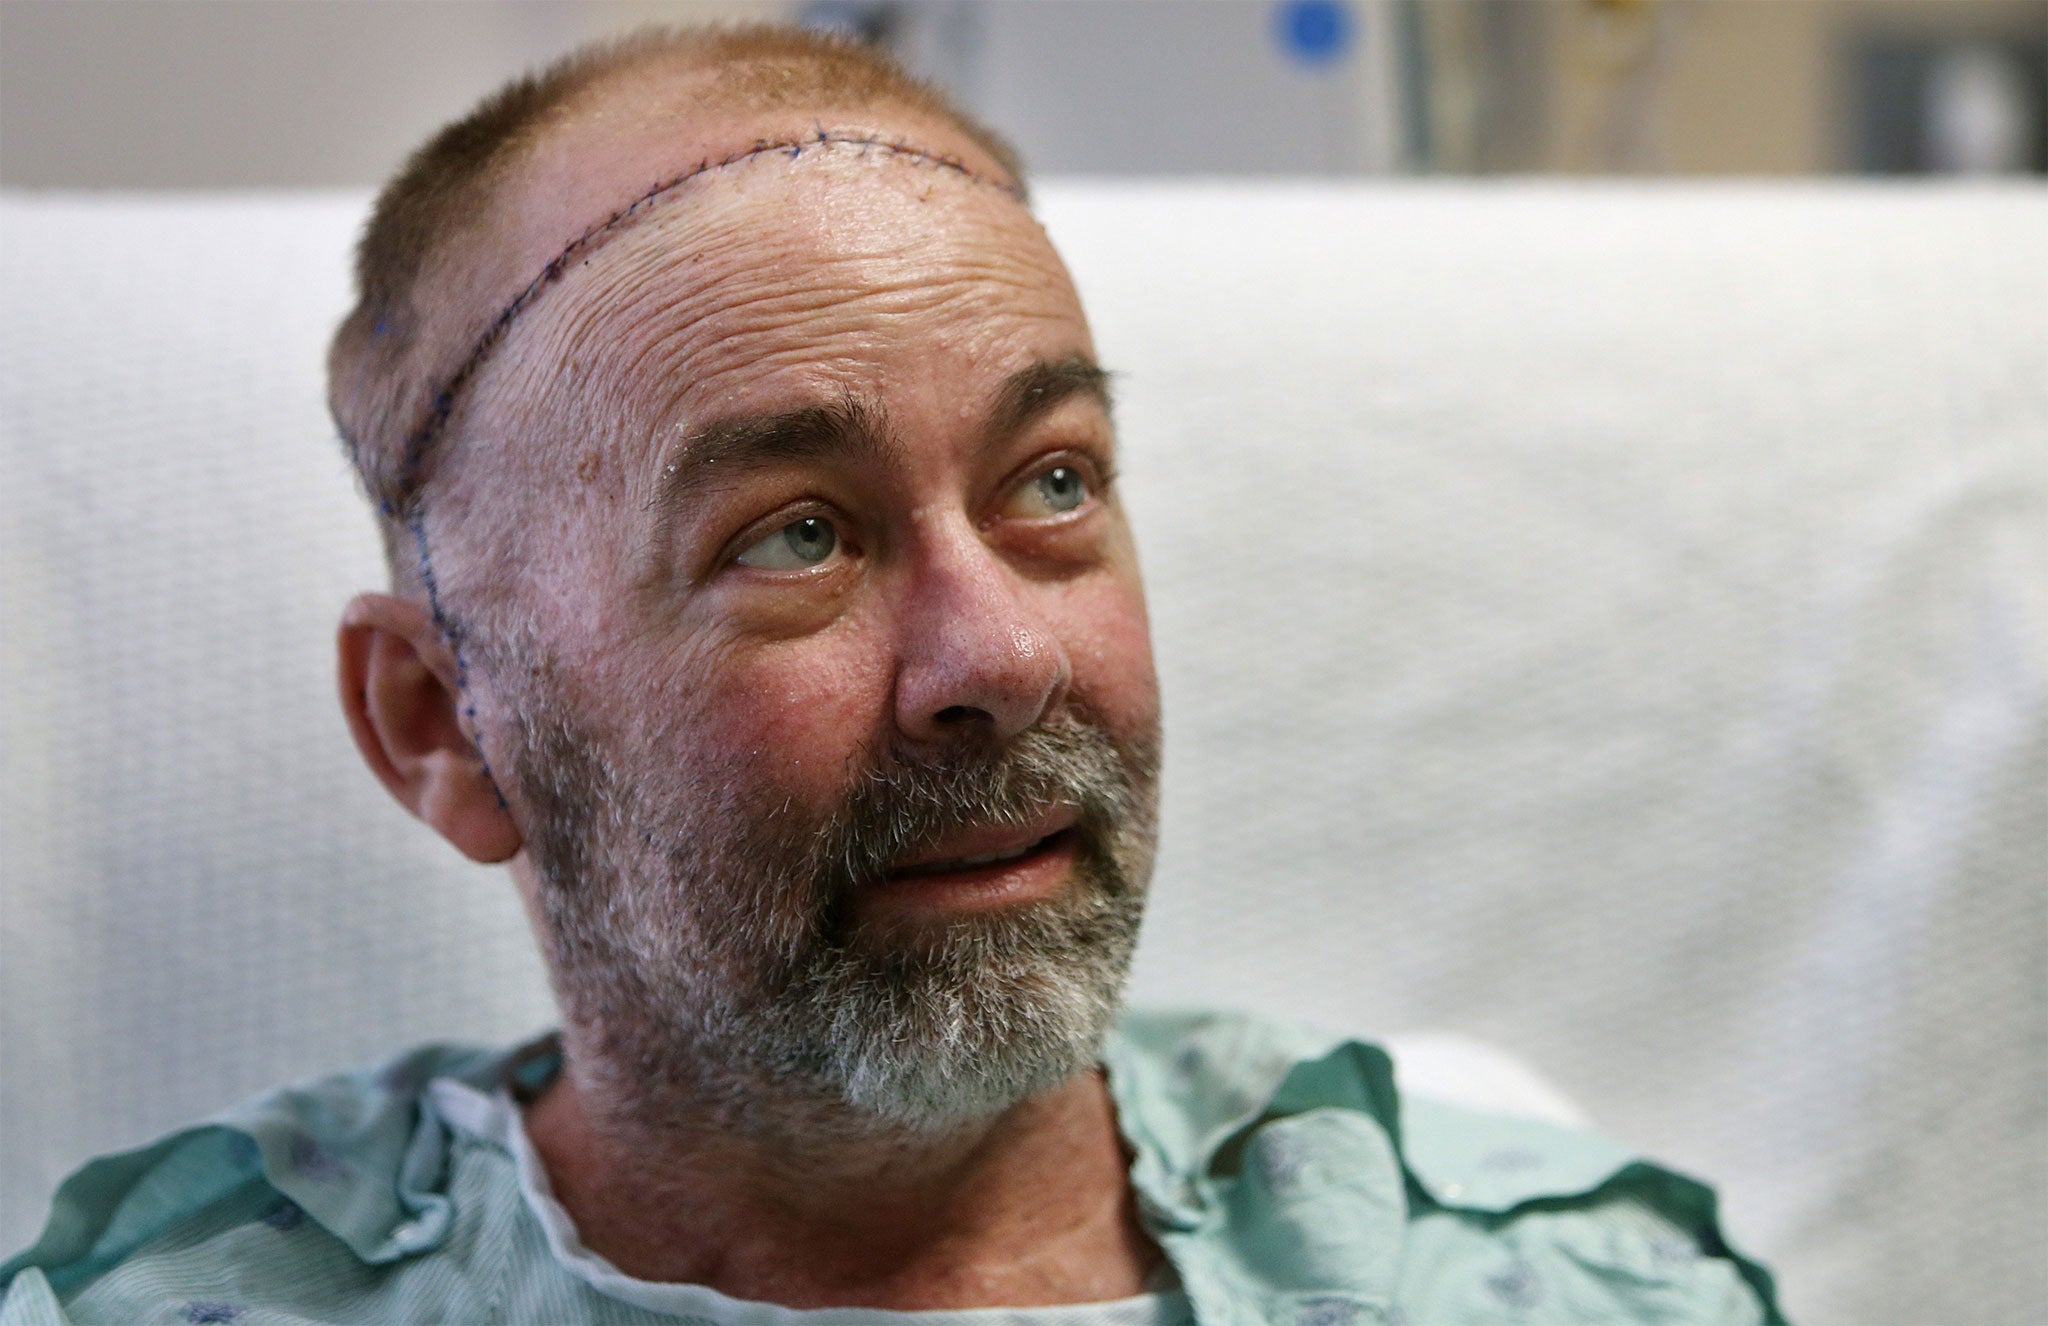 Jim Boysen was left with a large head wound from cancer treatment